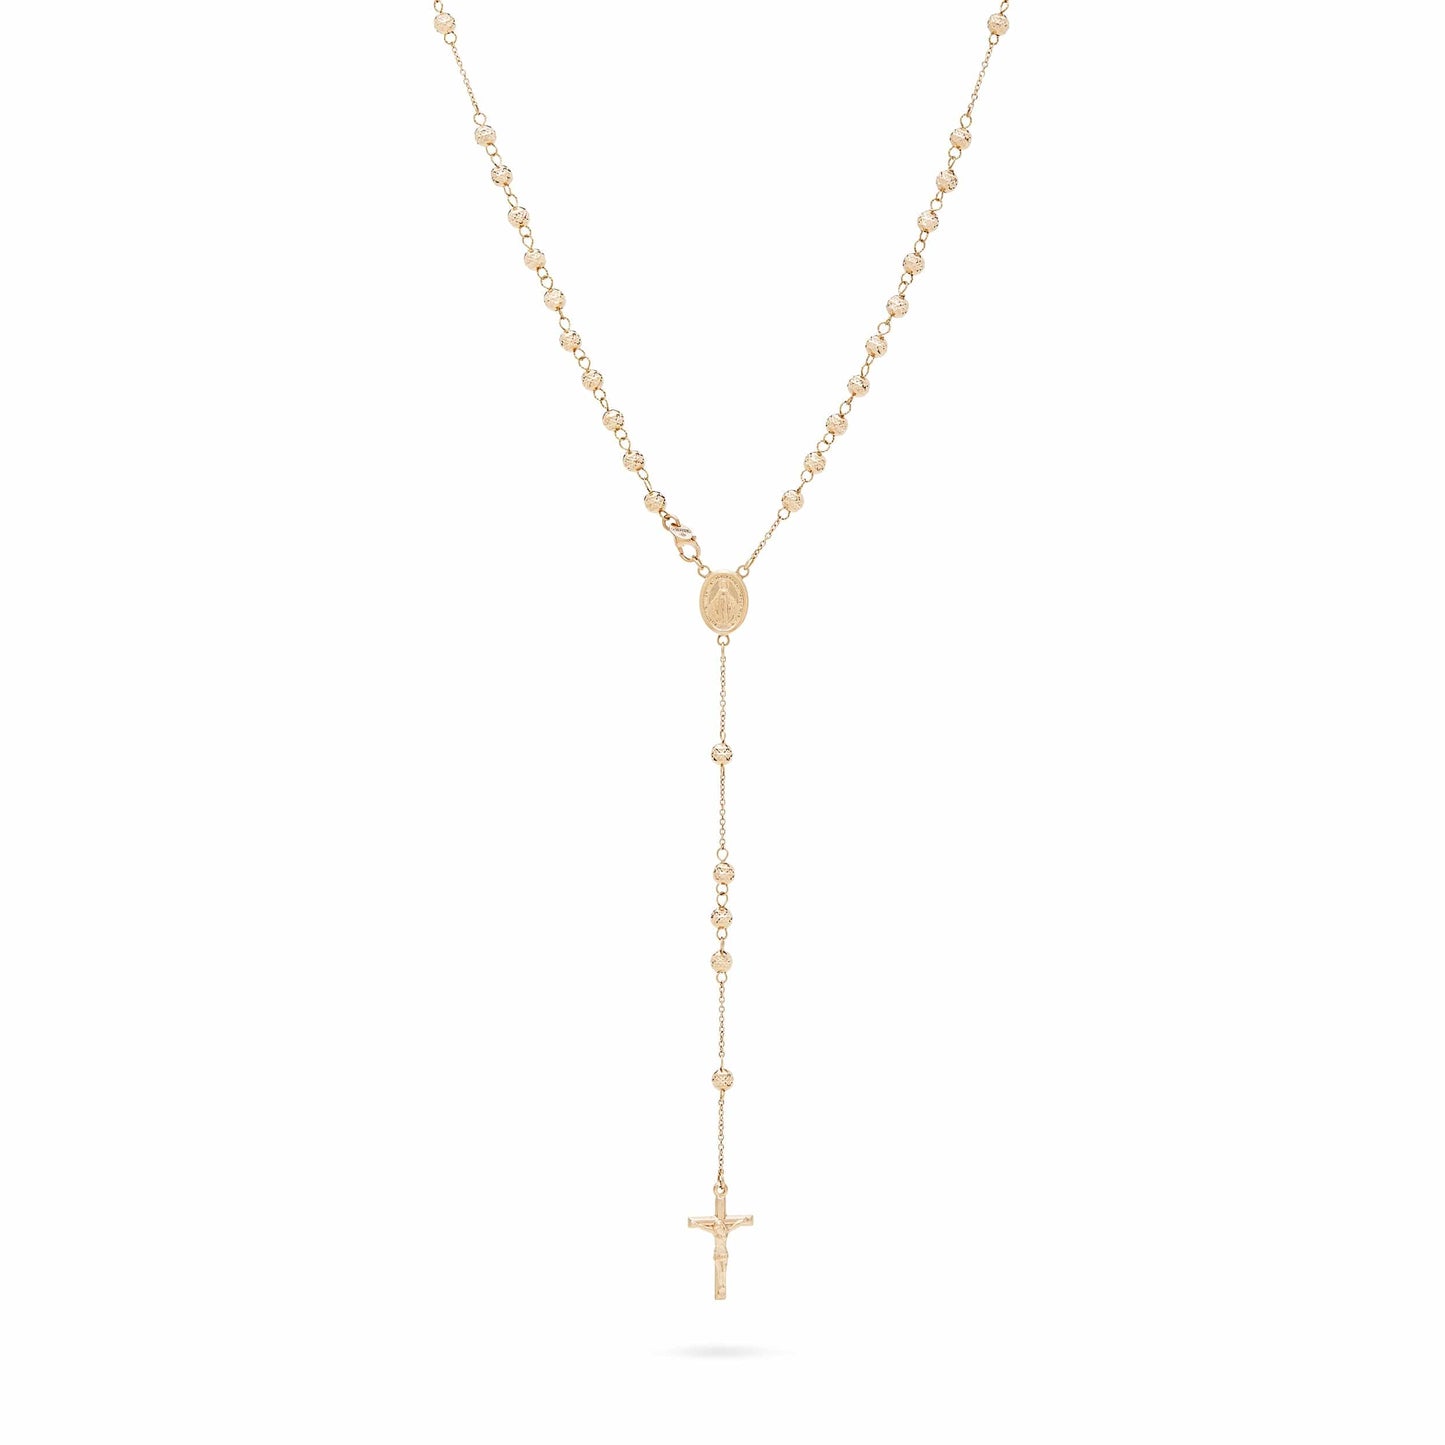 MONDO CATTOLICO Prayer Beads 41 cm (16.14 in) / 5 mm (0.19 in) Miraculous Mary Yellow Gold Rosary